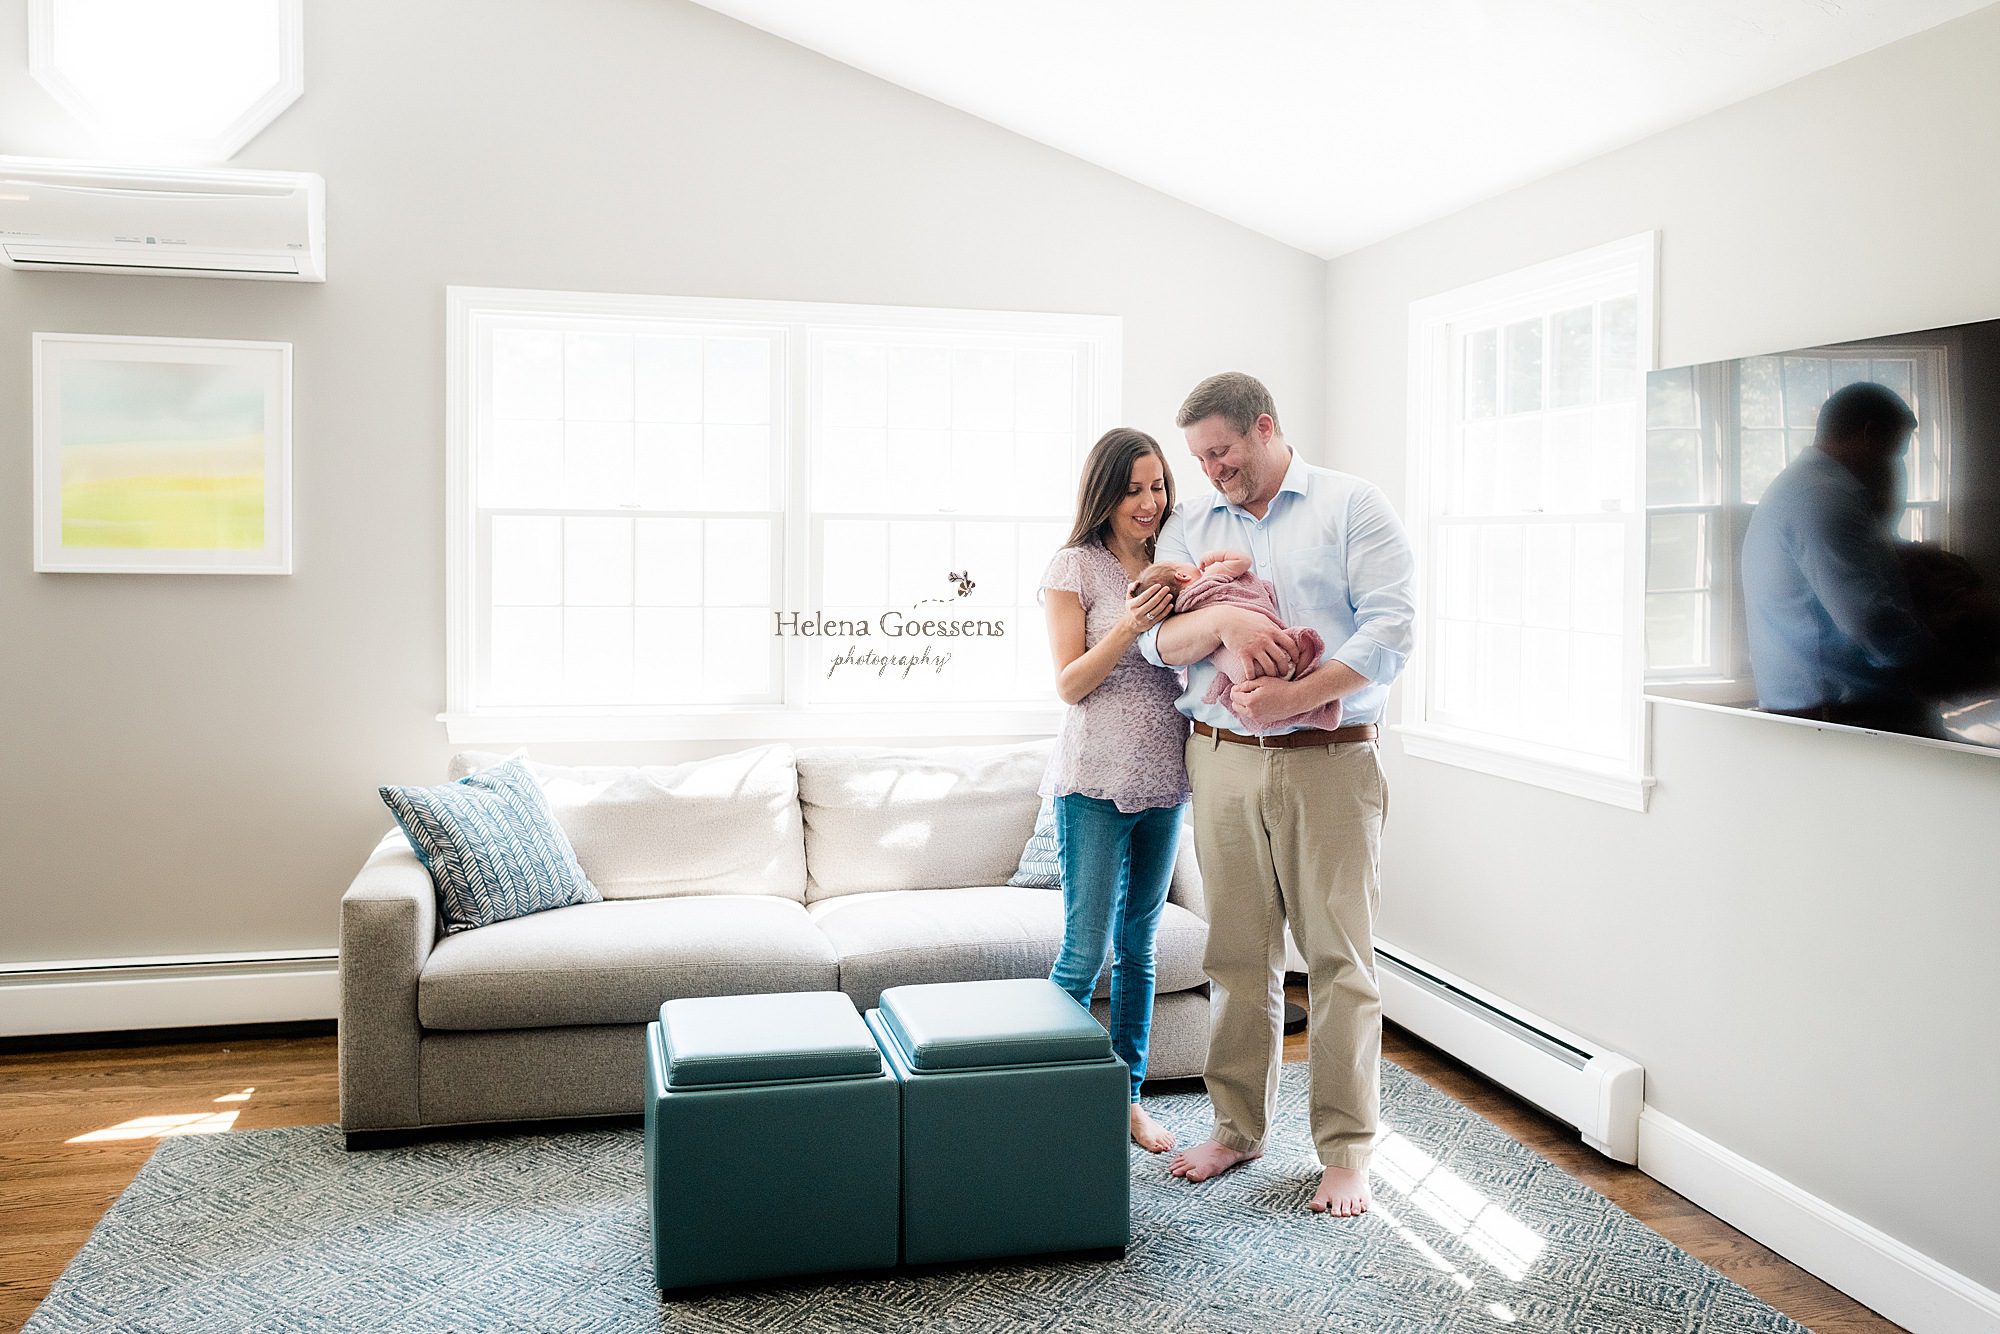 Helena Goessens Photography photographs newborn portraits in family's home